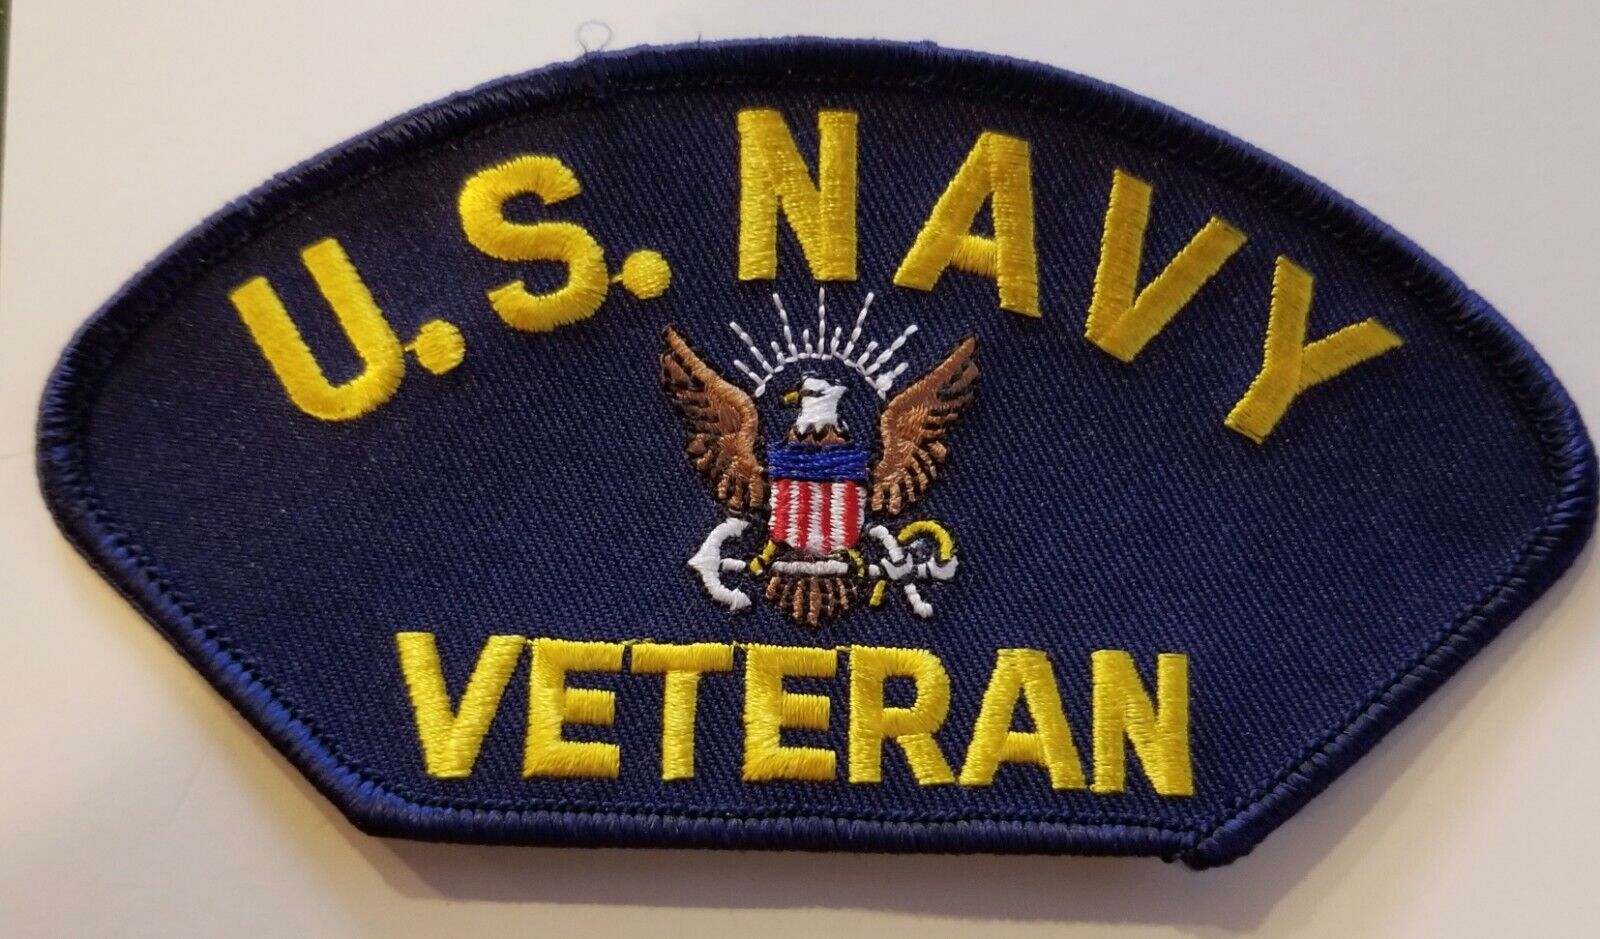 US NAVY VETERAN PATCH - MADE IN THE USA